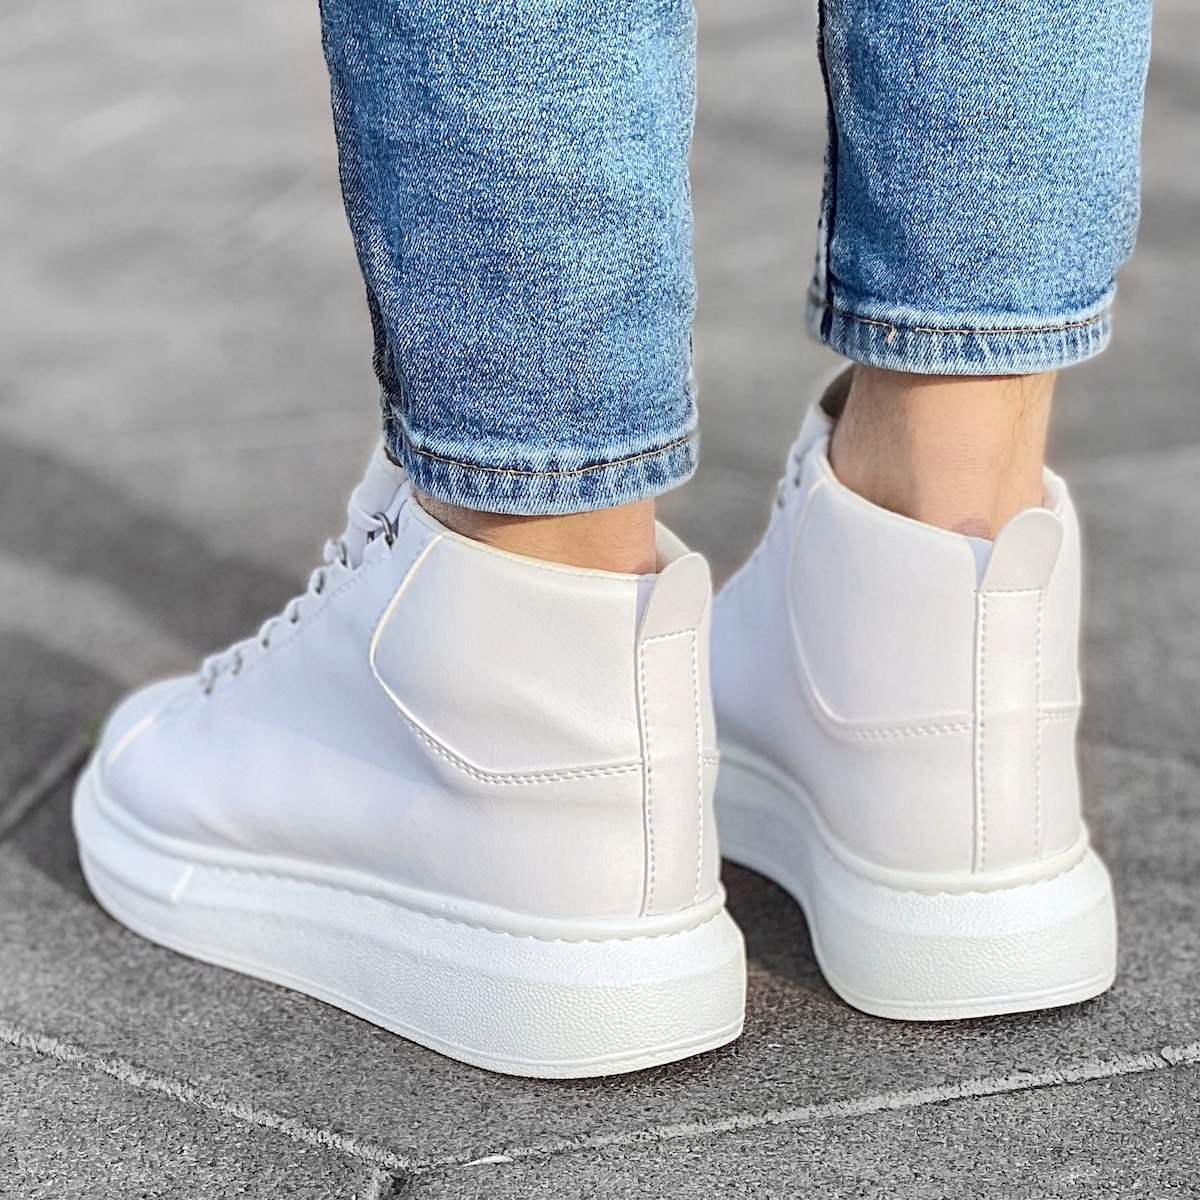 Hype Sole Mox High Top Sneakers in White | Martin Valen